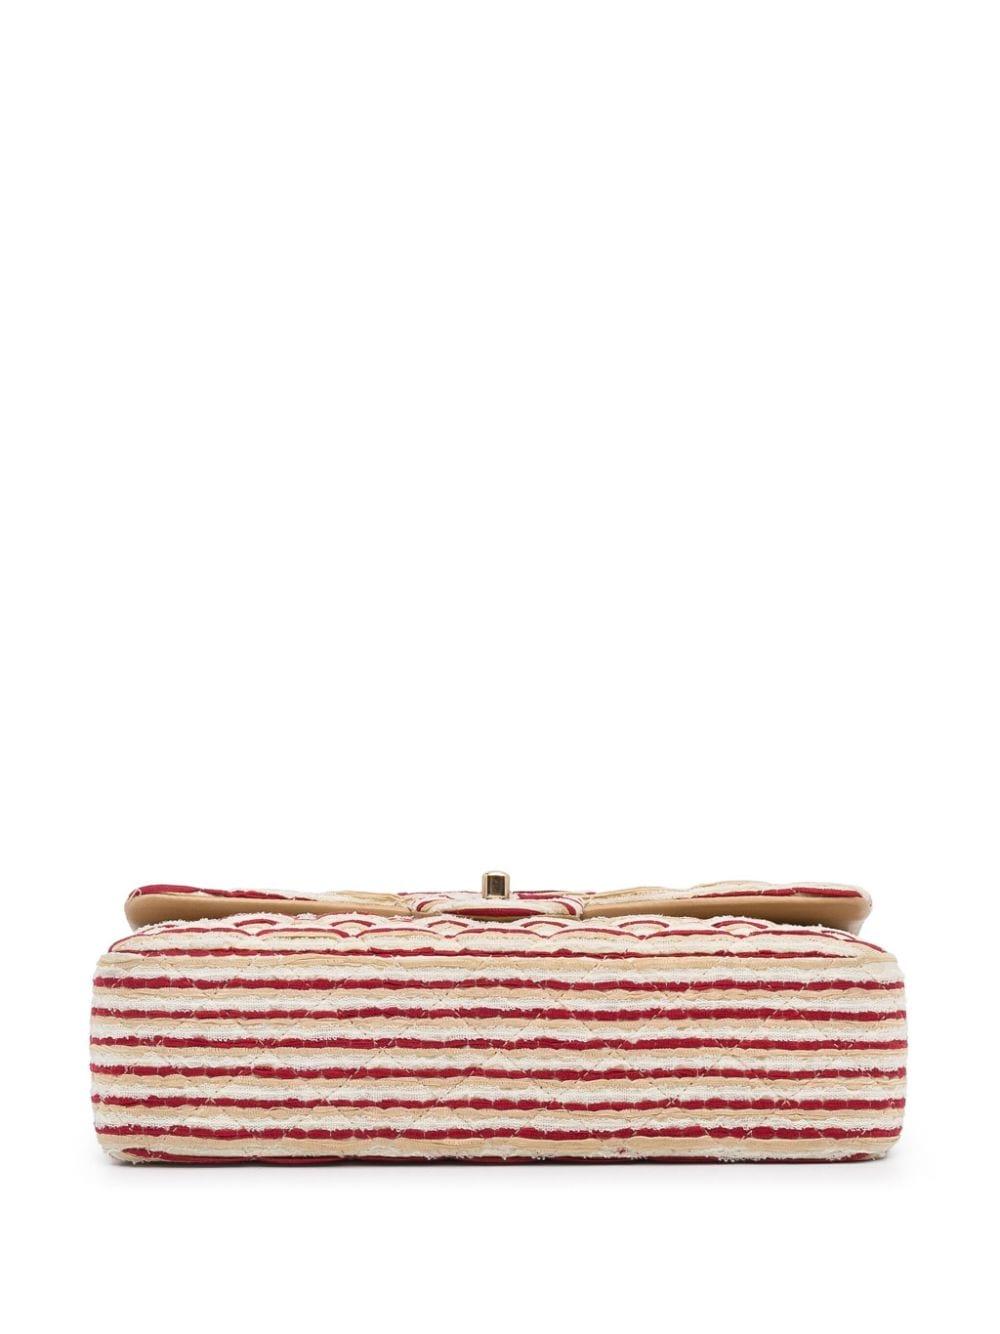 Chanel Medium Classic Vintage Striped Red and Beige Double Flap Bag  3